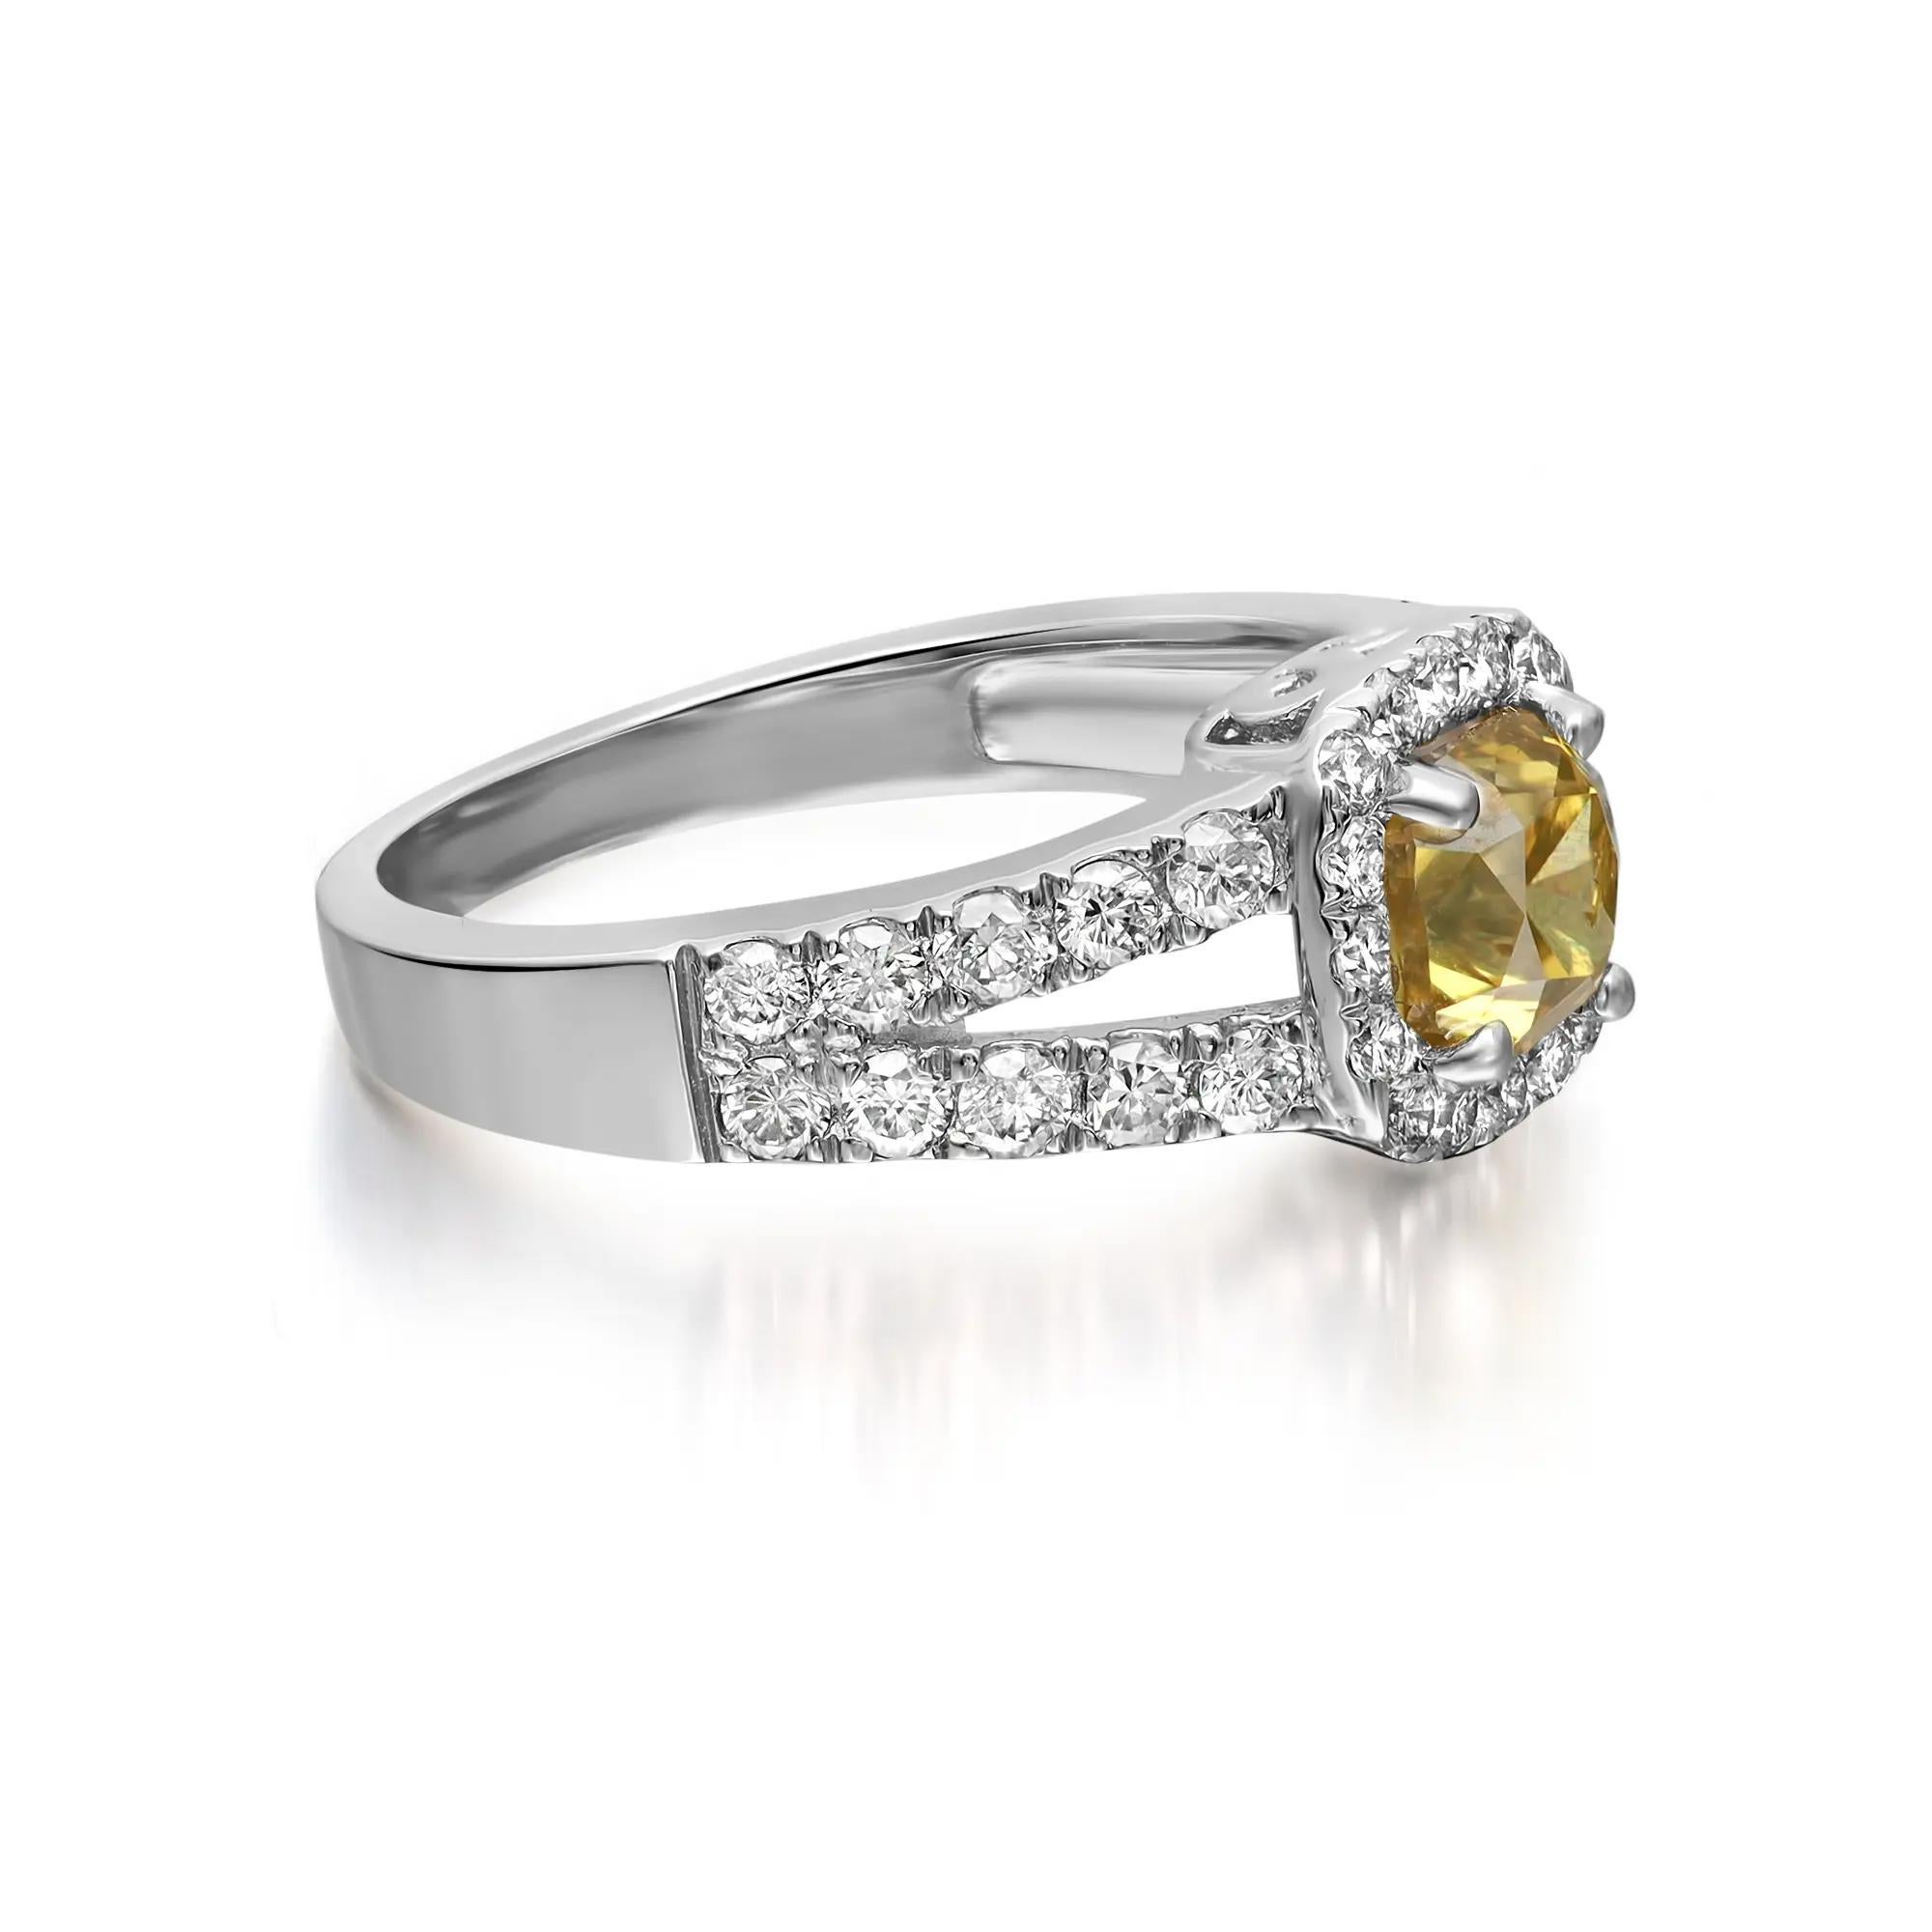 This stunning engagement ring comes with a flashy statement look. A must have in your jewelry collection. The ring is crafted in 18K white gold. Showcases a prong set cushion cut yellow diamond in the center weighing 1.00 carat, accented with round